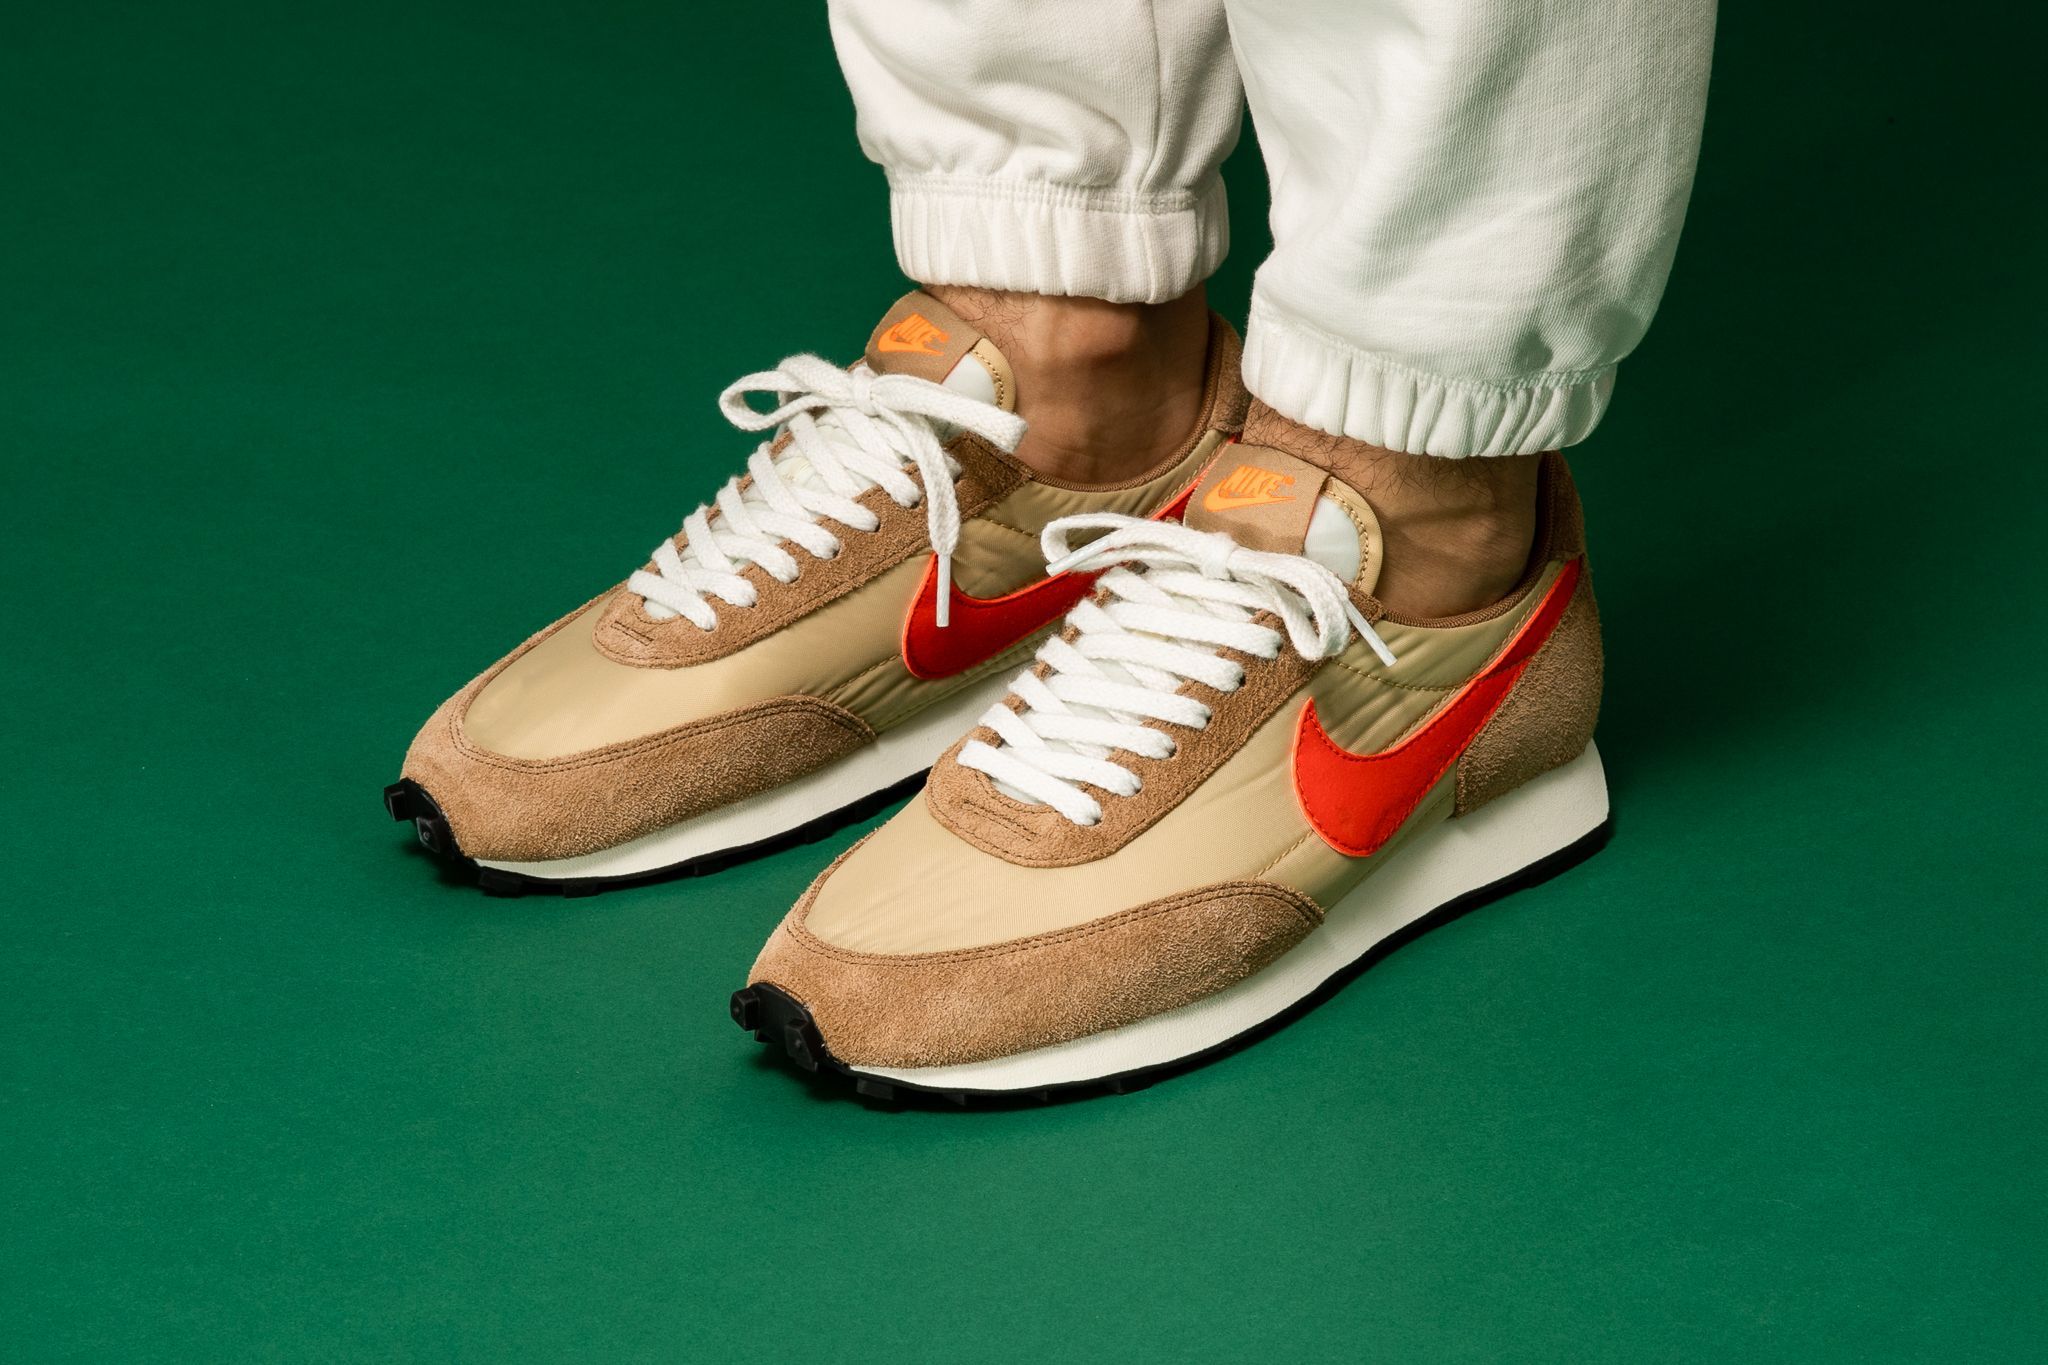 Titolo on "ONLINE NOW🔥🔥🔥 Nike Daybreak "Vegas Gold/College Tan" Get your pair ➡️ https://t.co/N5bT5hJDRa sizerun 🏃🏻 US 6 (38.5) - US 13 (47.5) style code 🔎 BV7725-700 #titolo #nike #nikedaybreak #